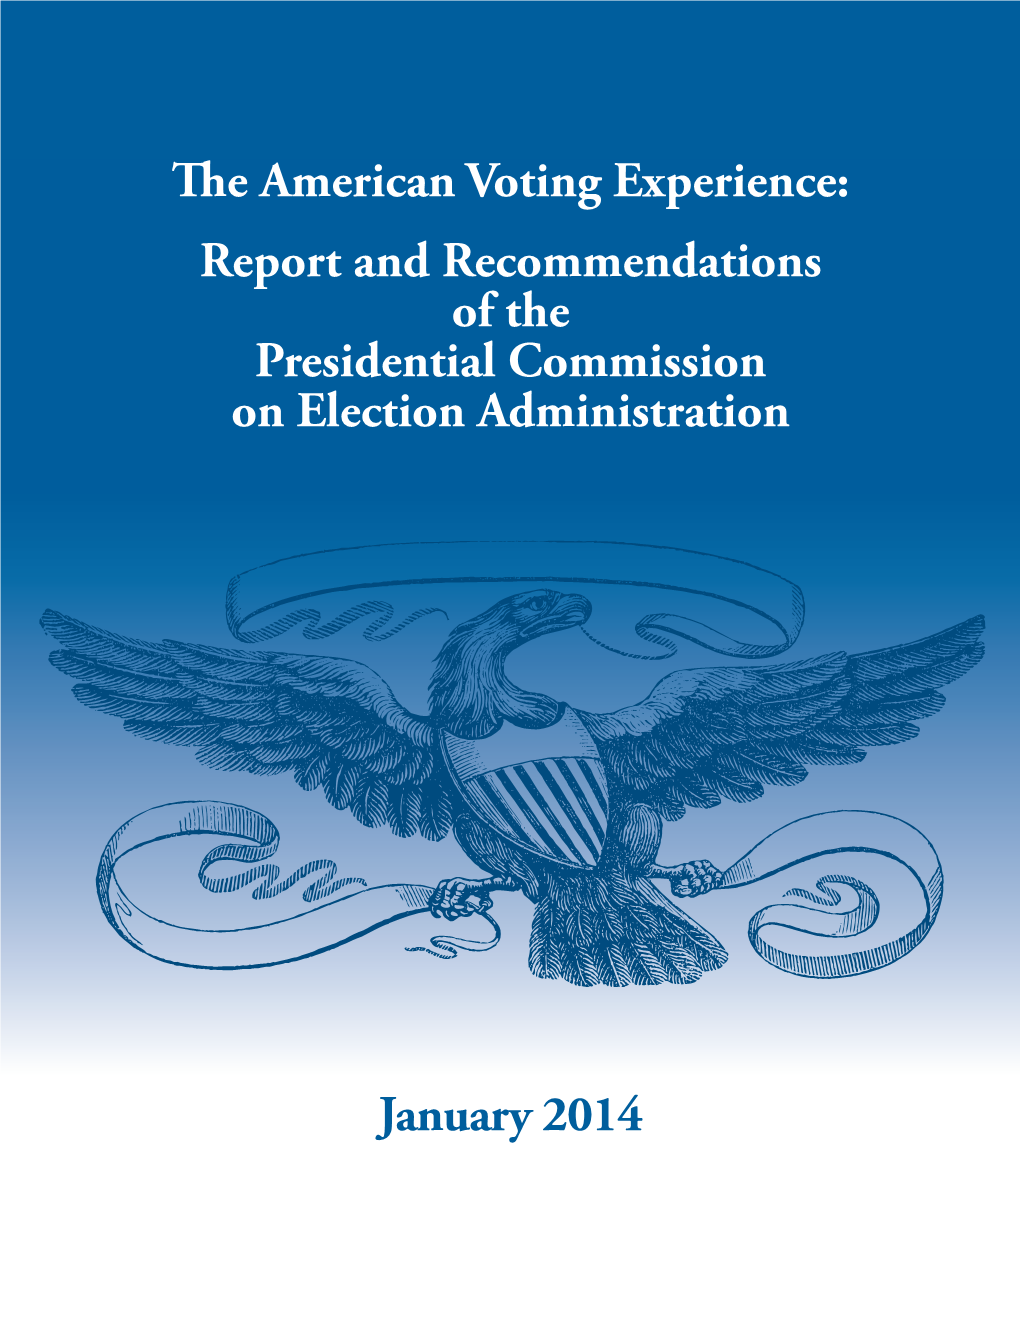 January 2014 Te American Voting Experience: Report and Recommendations of the Presidential Commission on Election Administrat